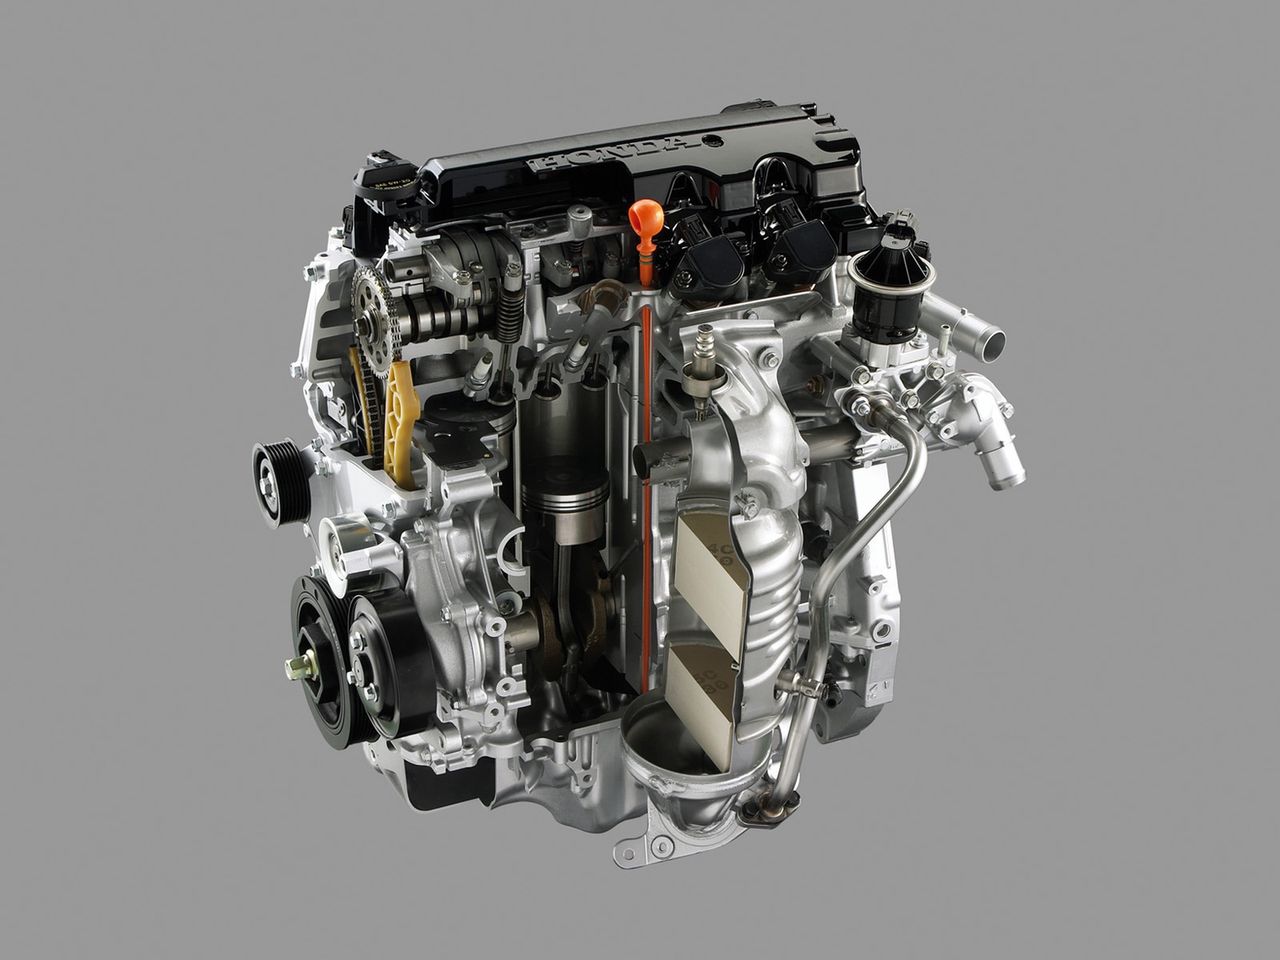 Honda's 1.8 i-VTEC (R18A2) is the best engine today.  What are the typical drawbacks and problems found in it?